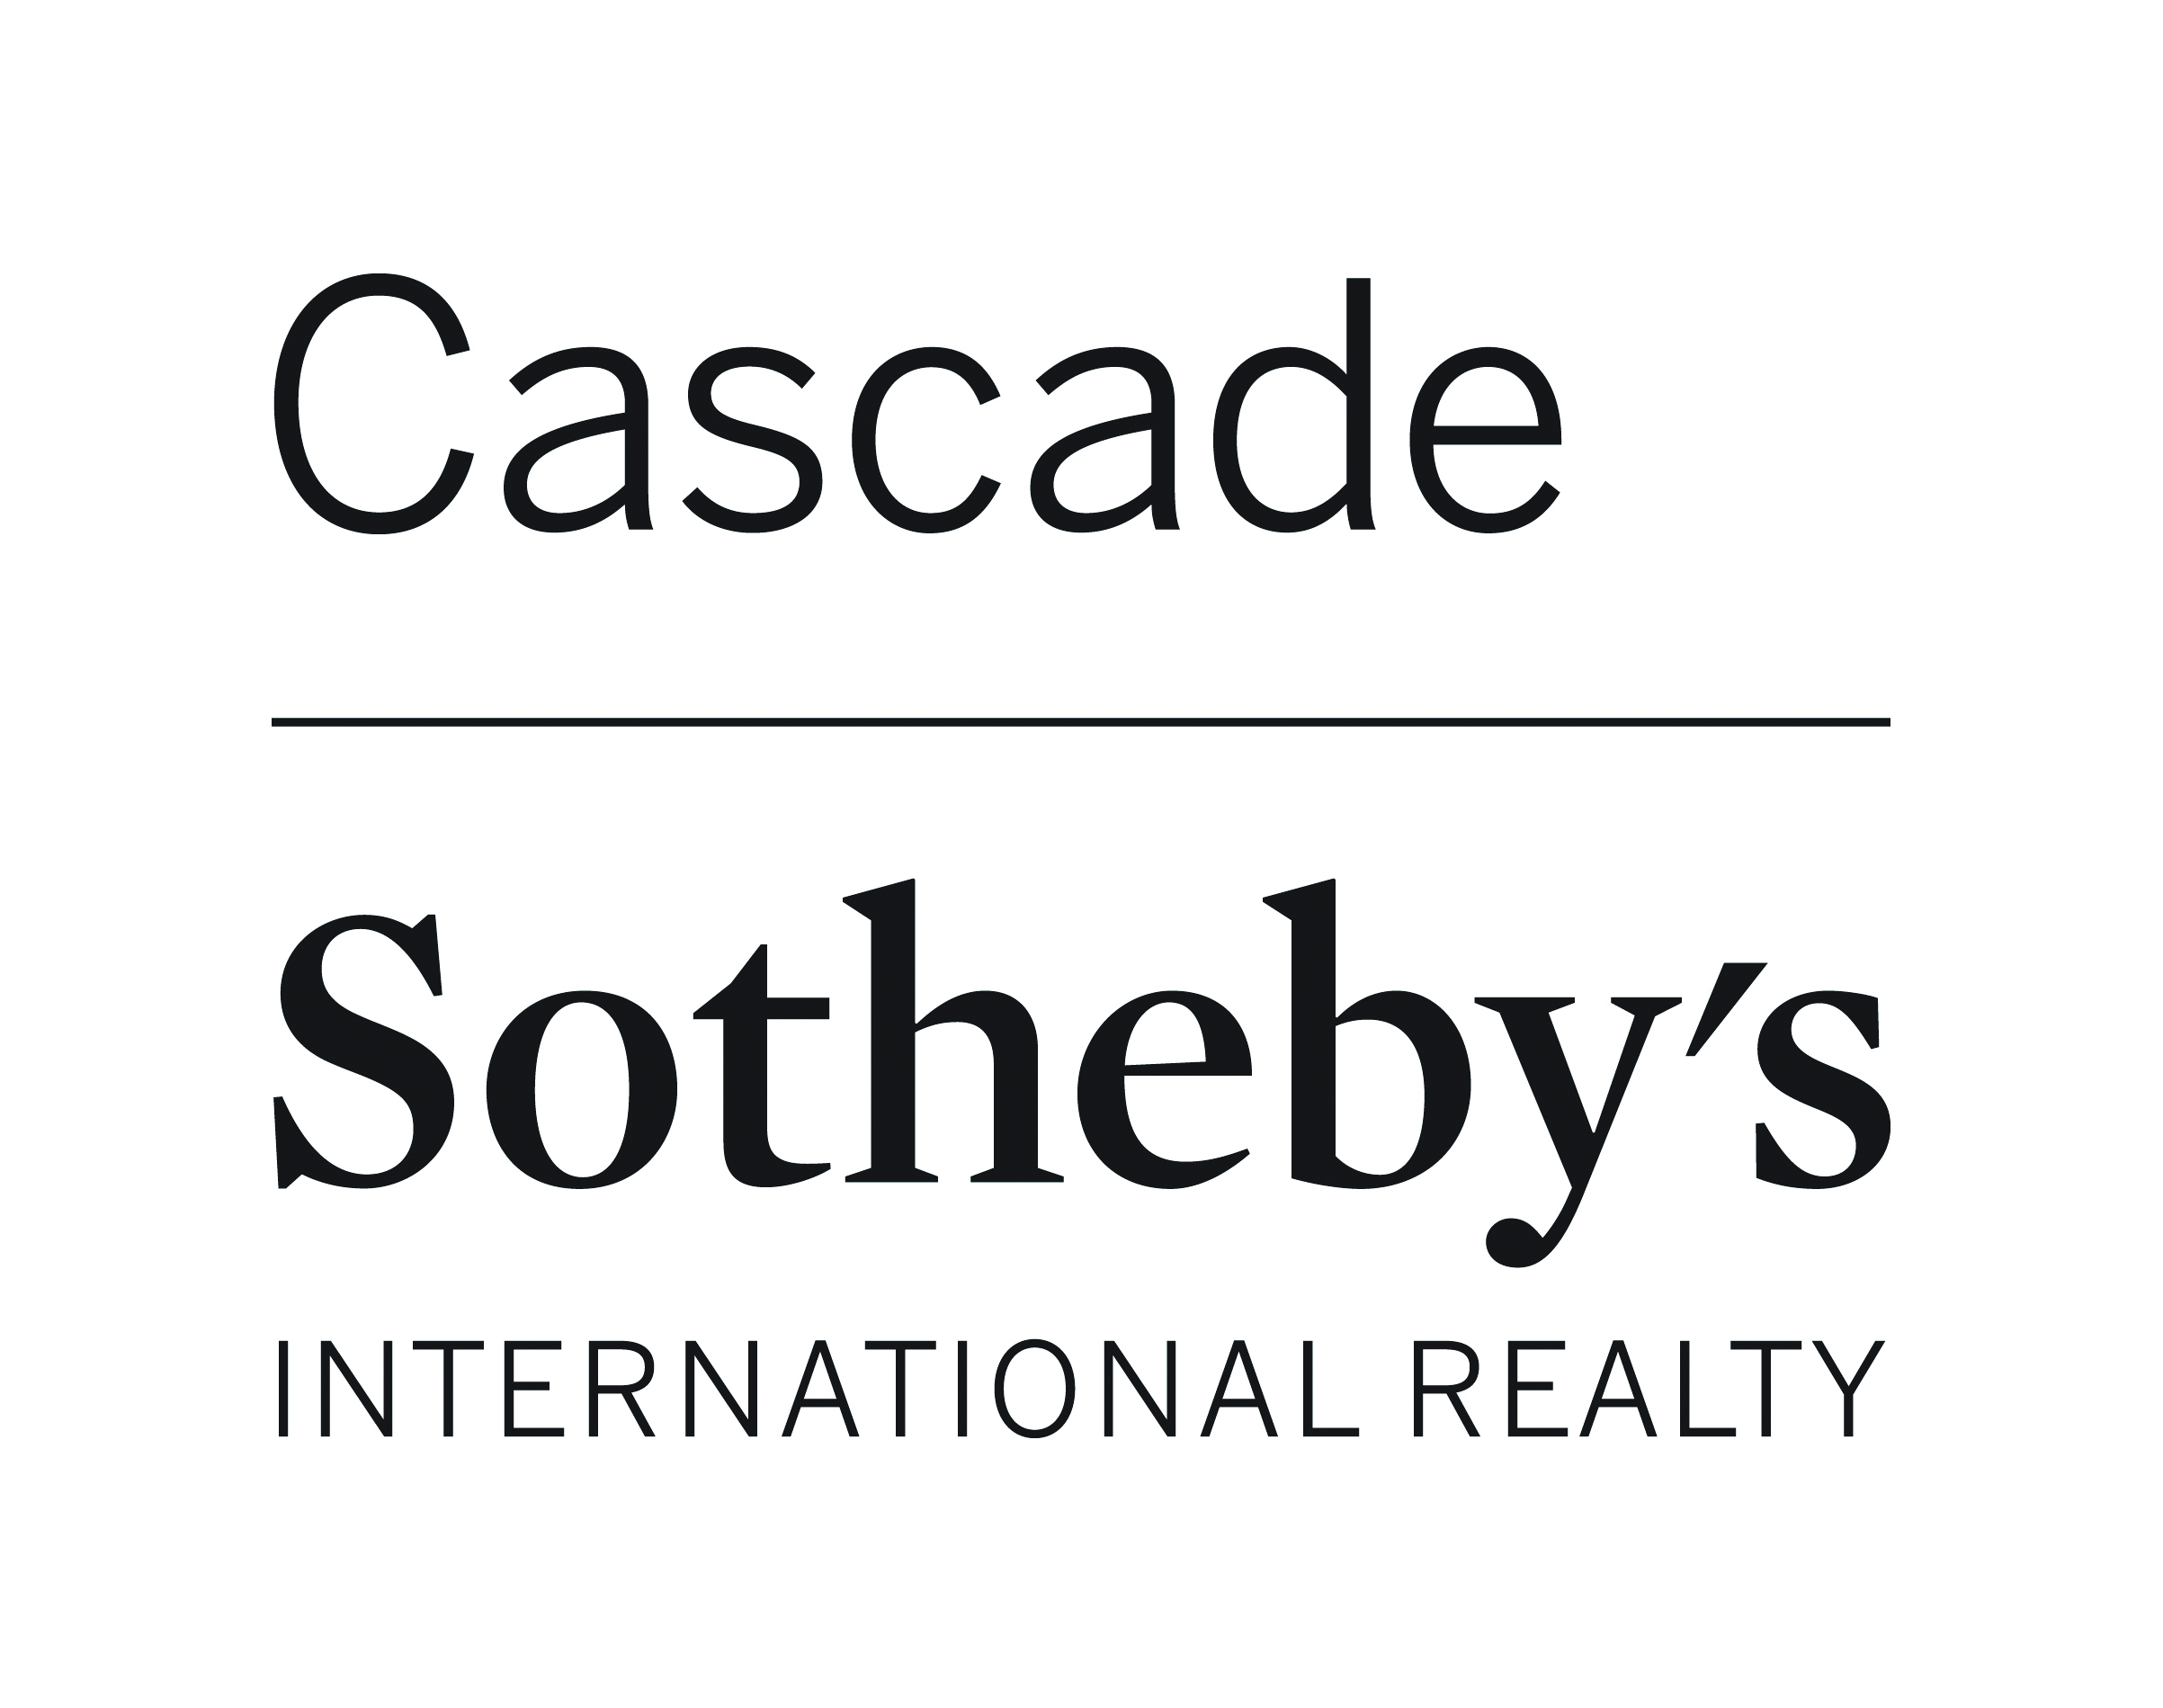 Cascade Sotheby's International Realty serving clients with innovative strategies in markets throughout Oregon and SW Washington.